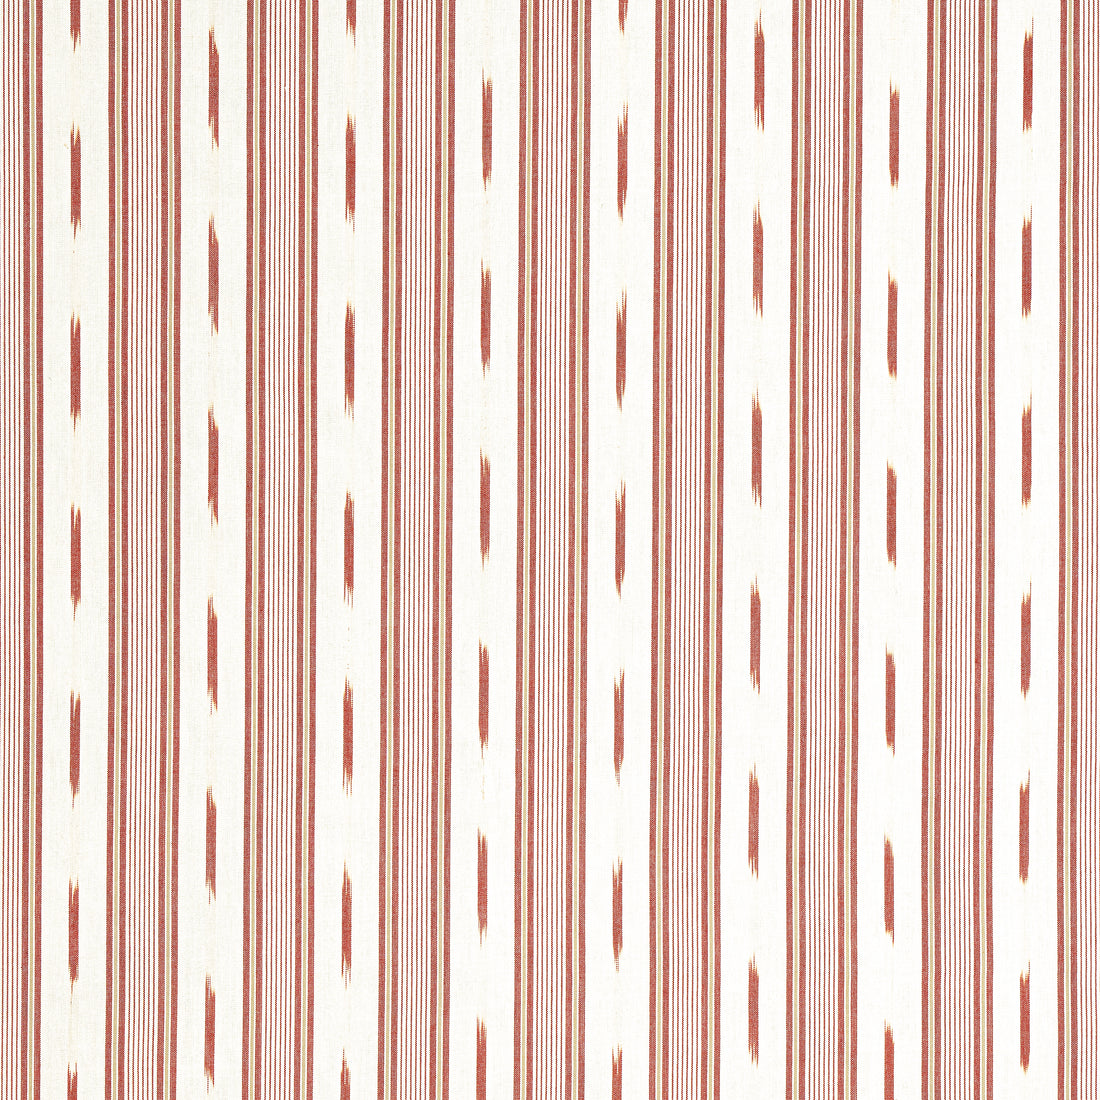 Odeshia Stripe fabric in sunbaked color - pattern number W781309 - by Thibaut in the Montecito collection